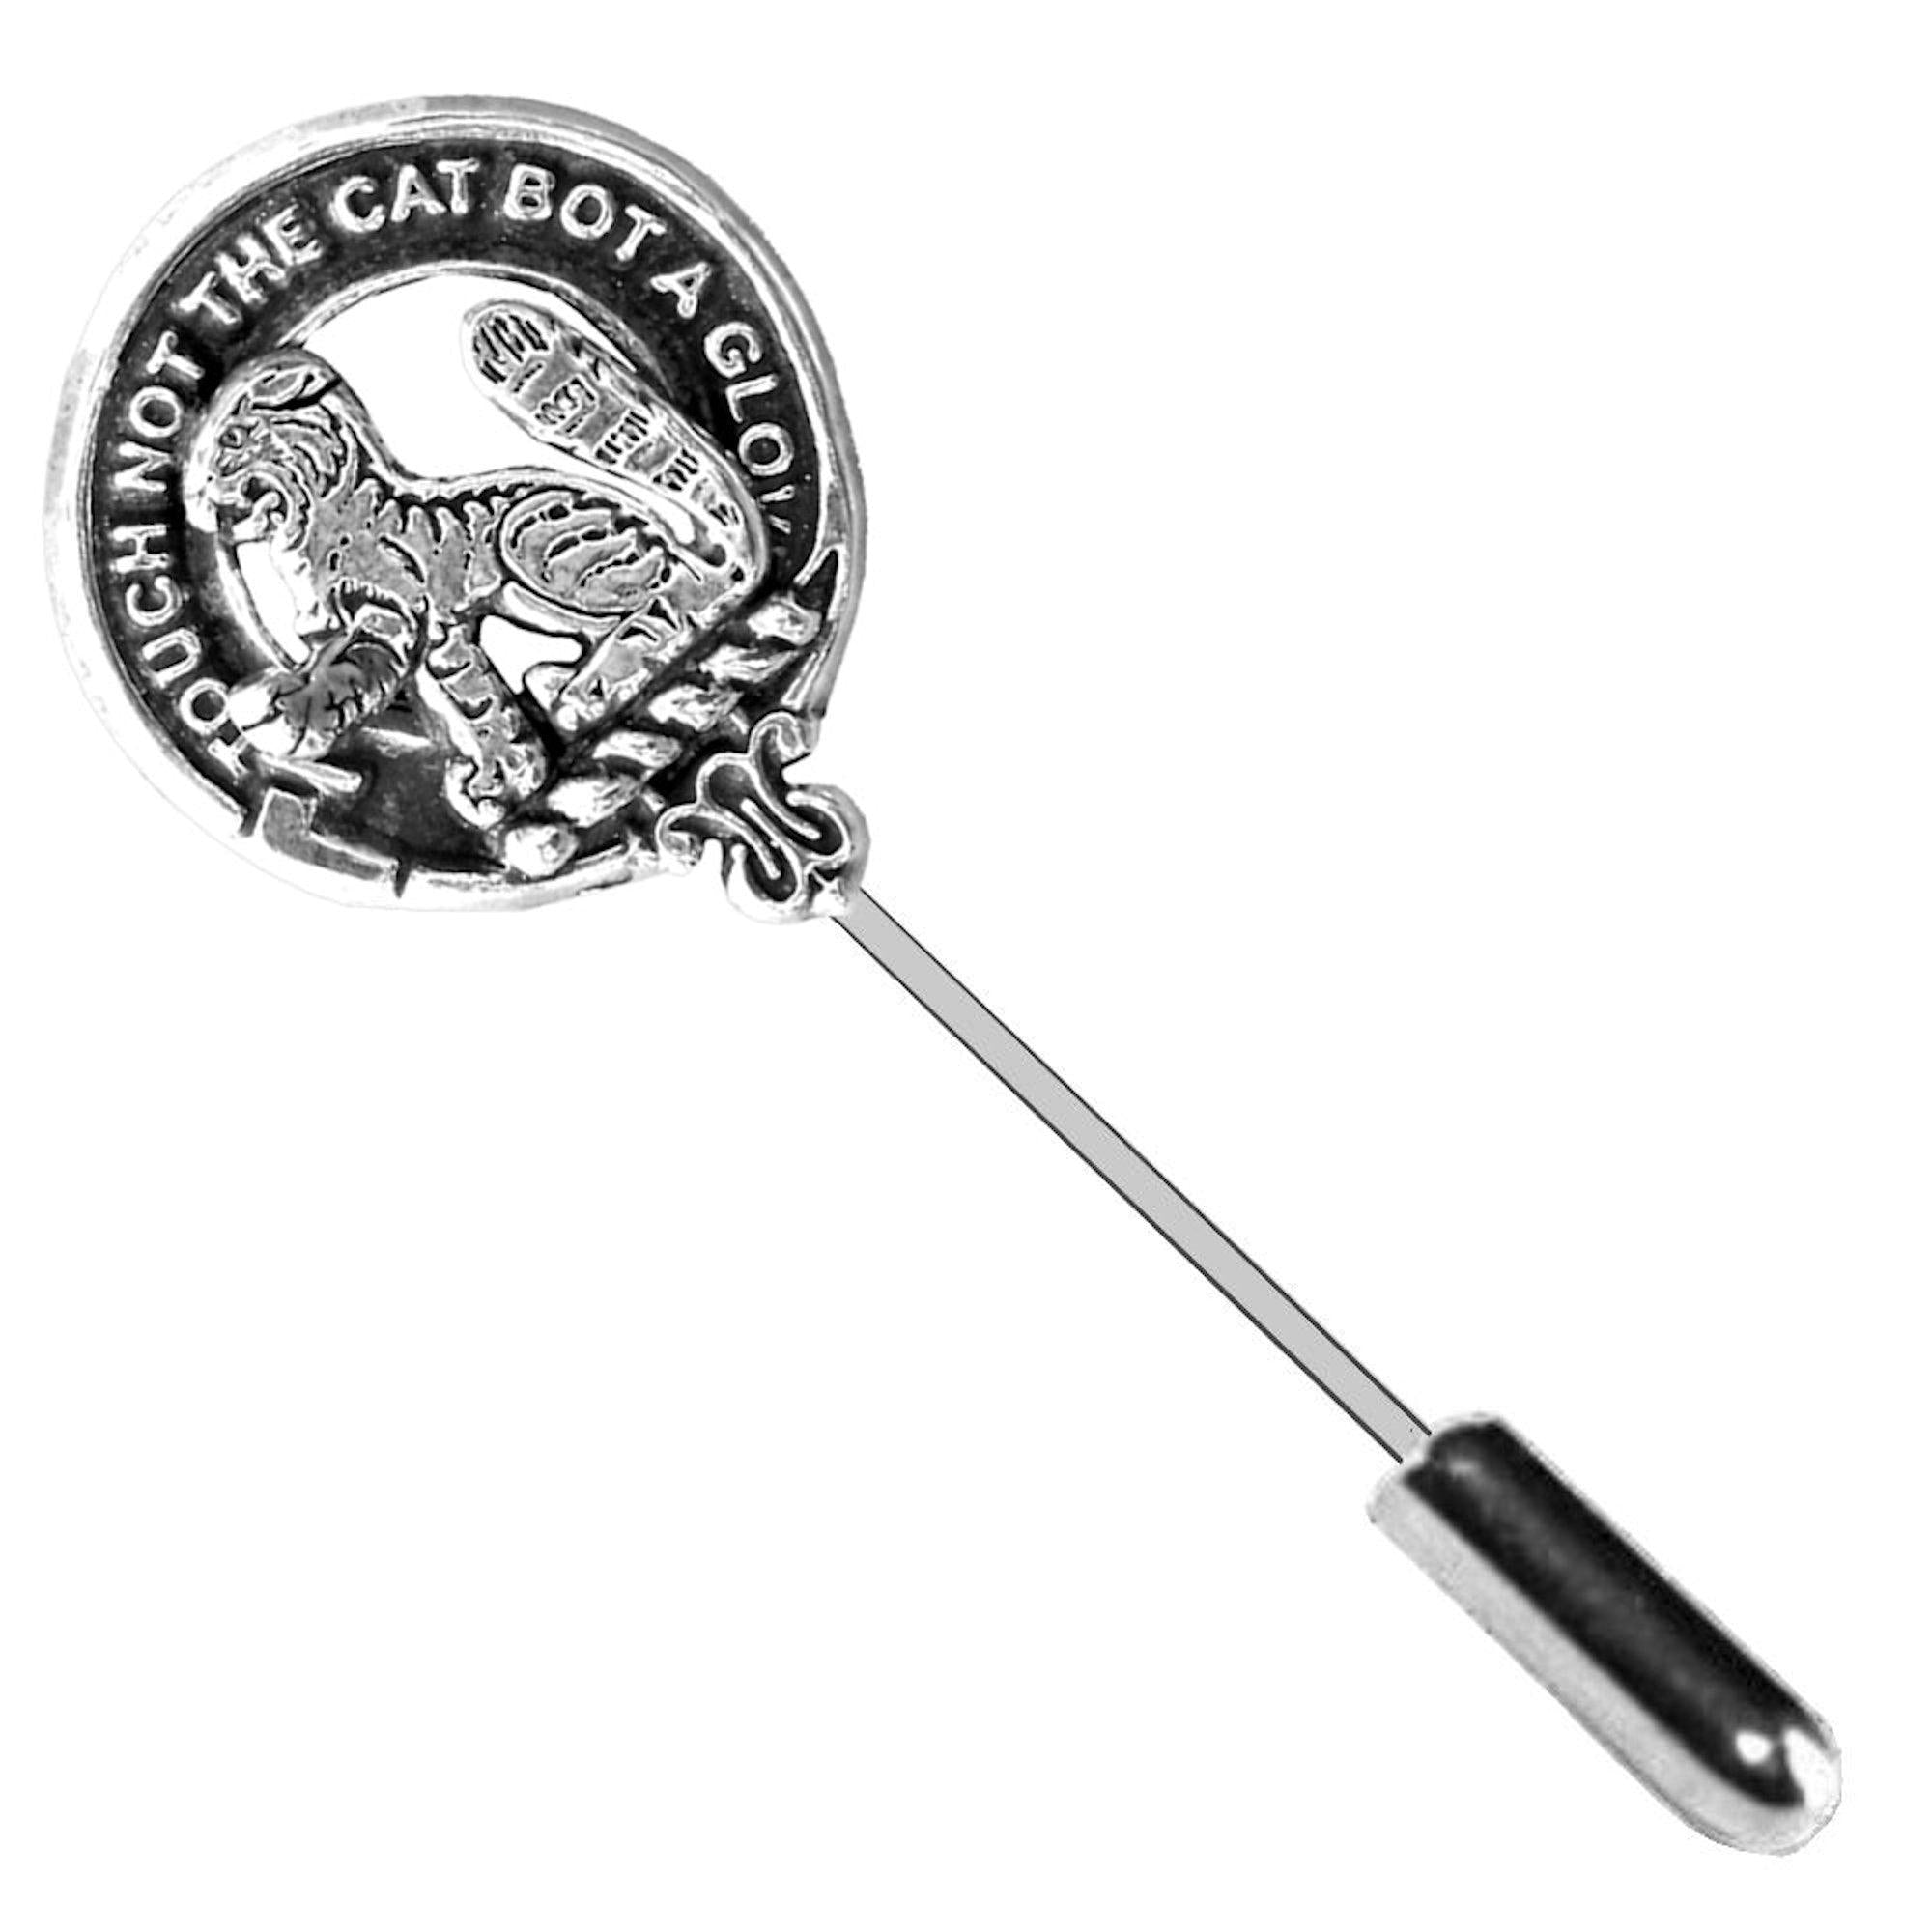 Gow Clan Crest Stick or Cravat pin, Sterling Silver